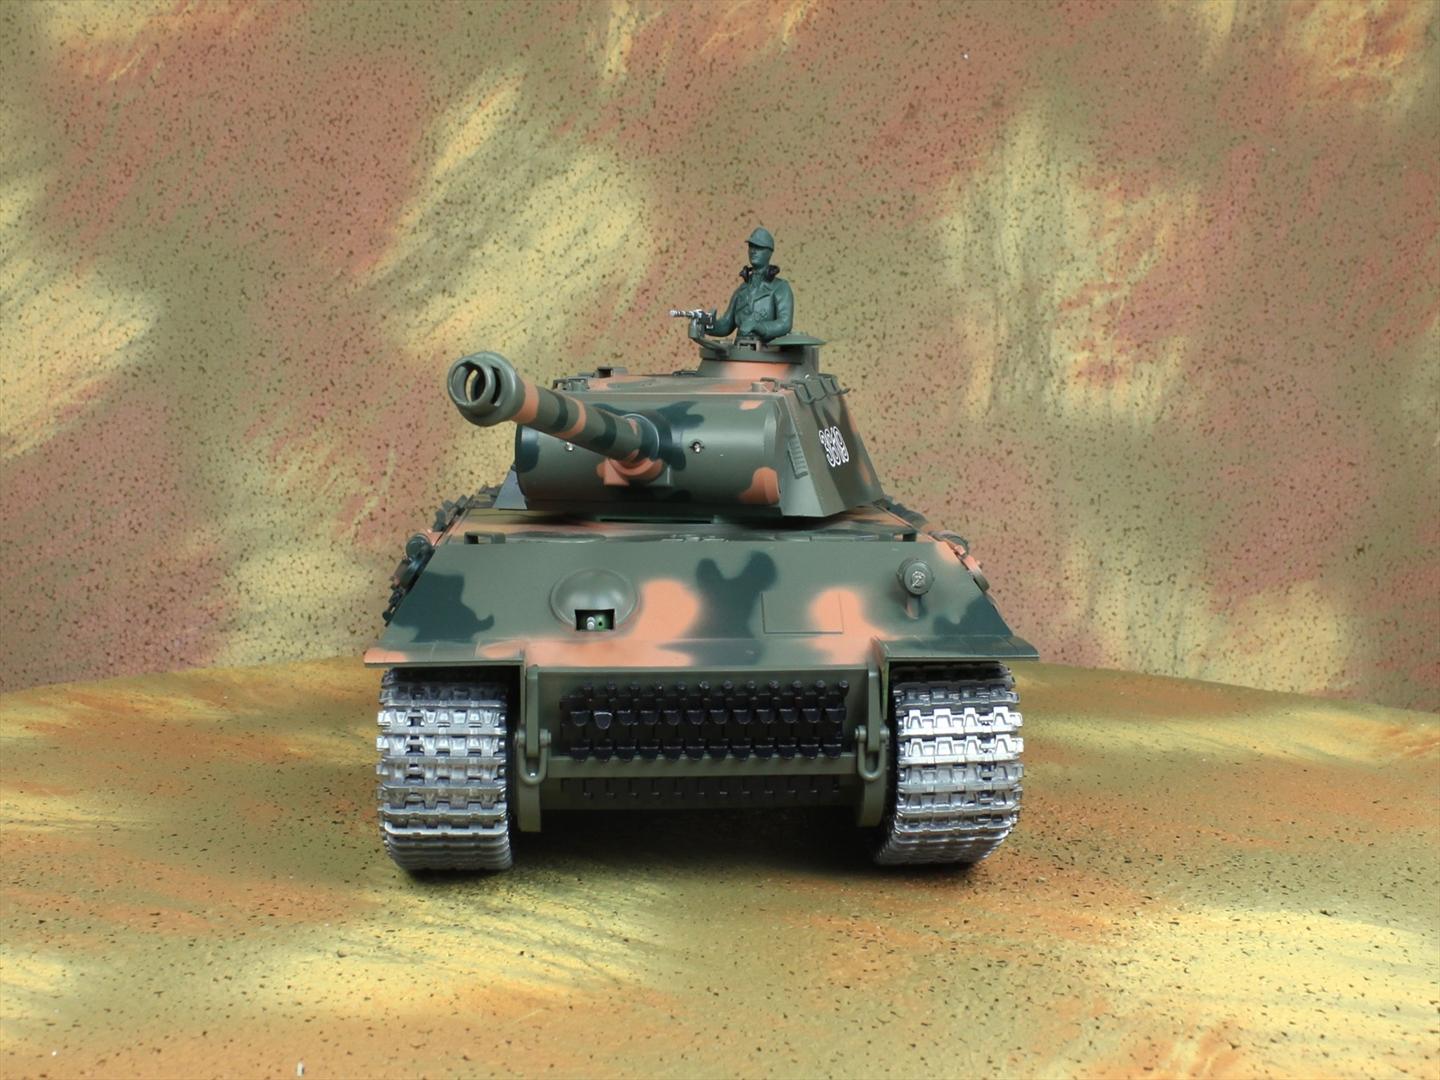 HENG-LONG Toys 3819 RC Scale Model Tank, World War II Germany Panther Remote Control Tank.